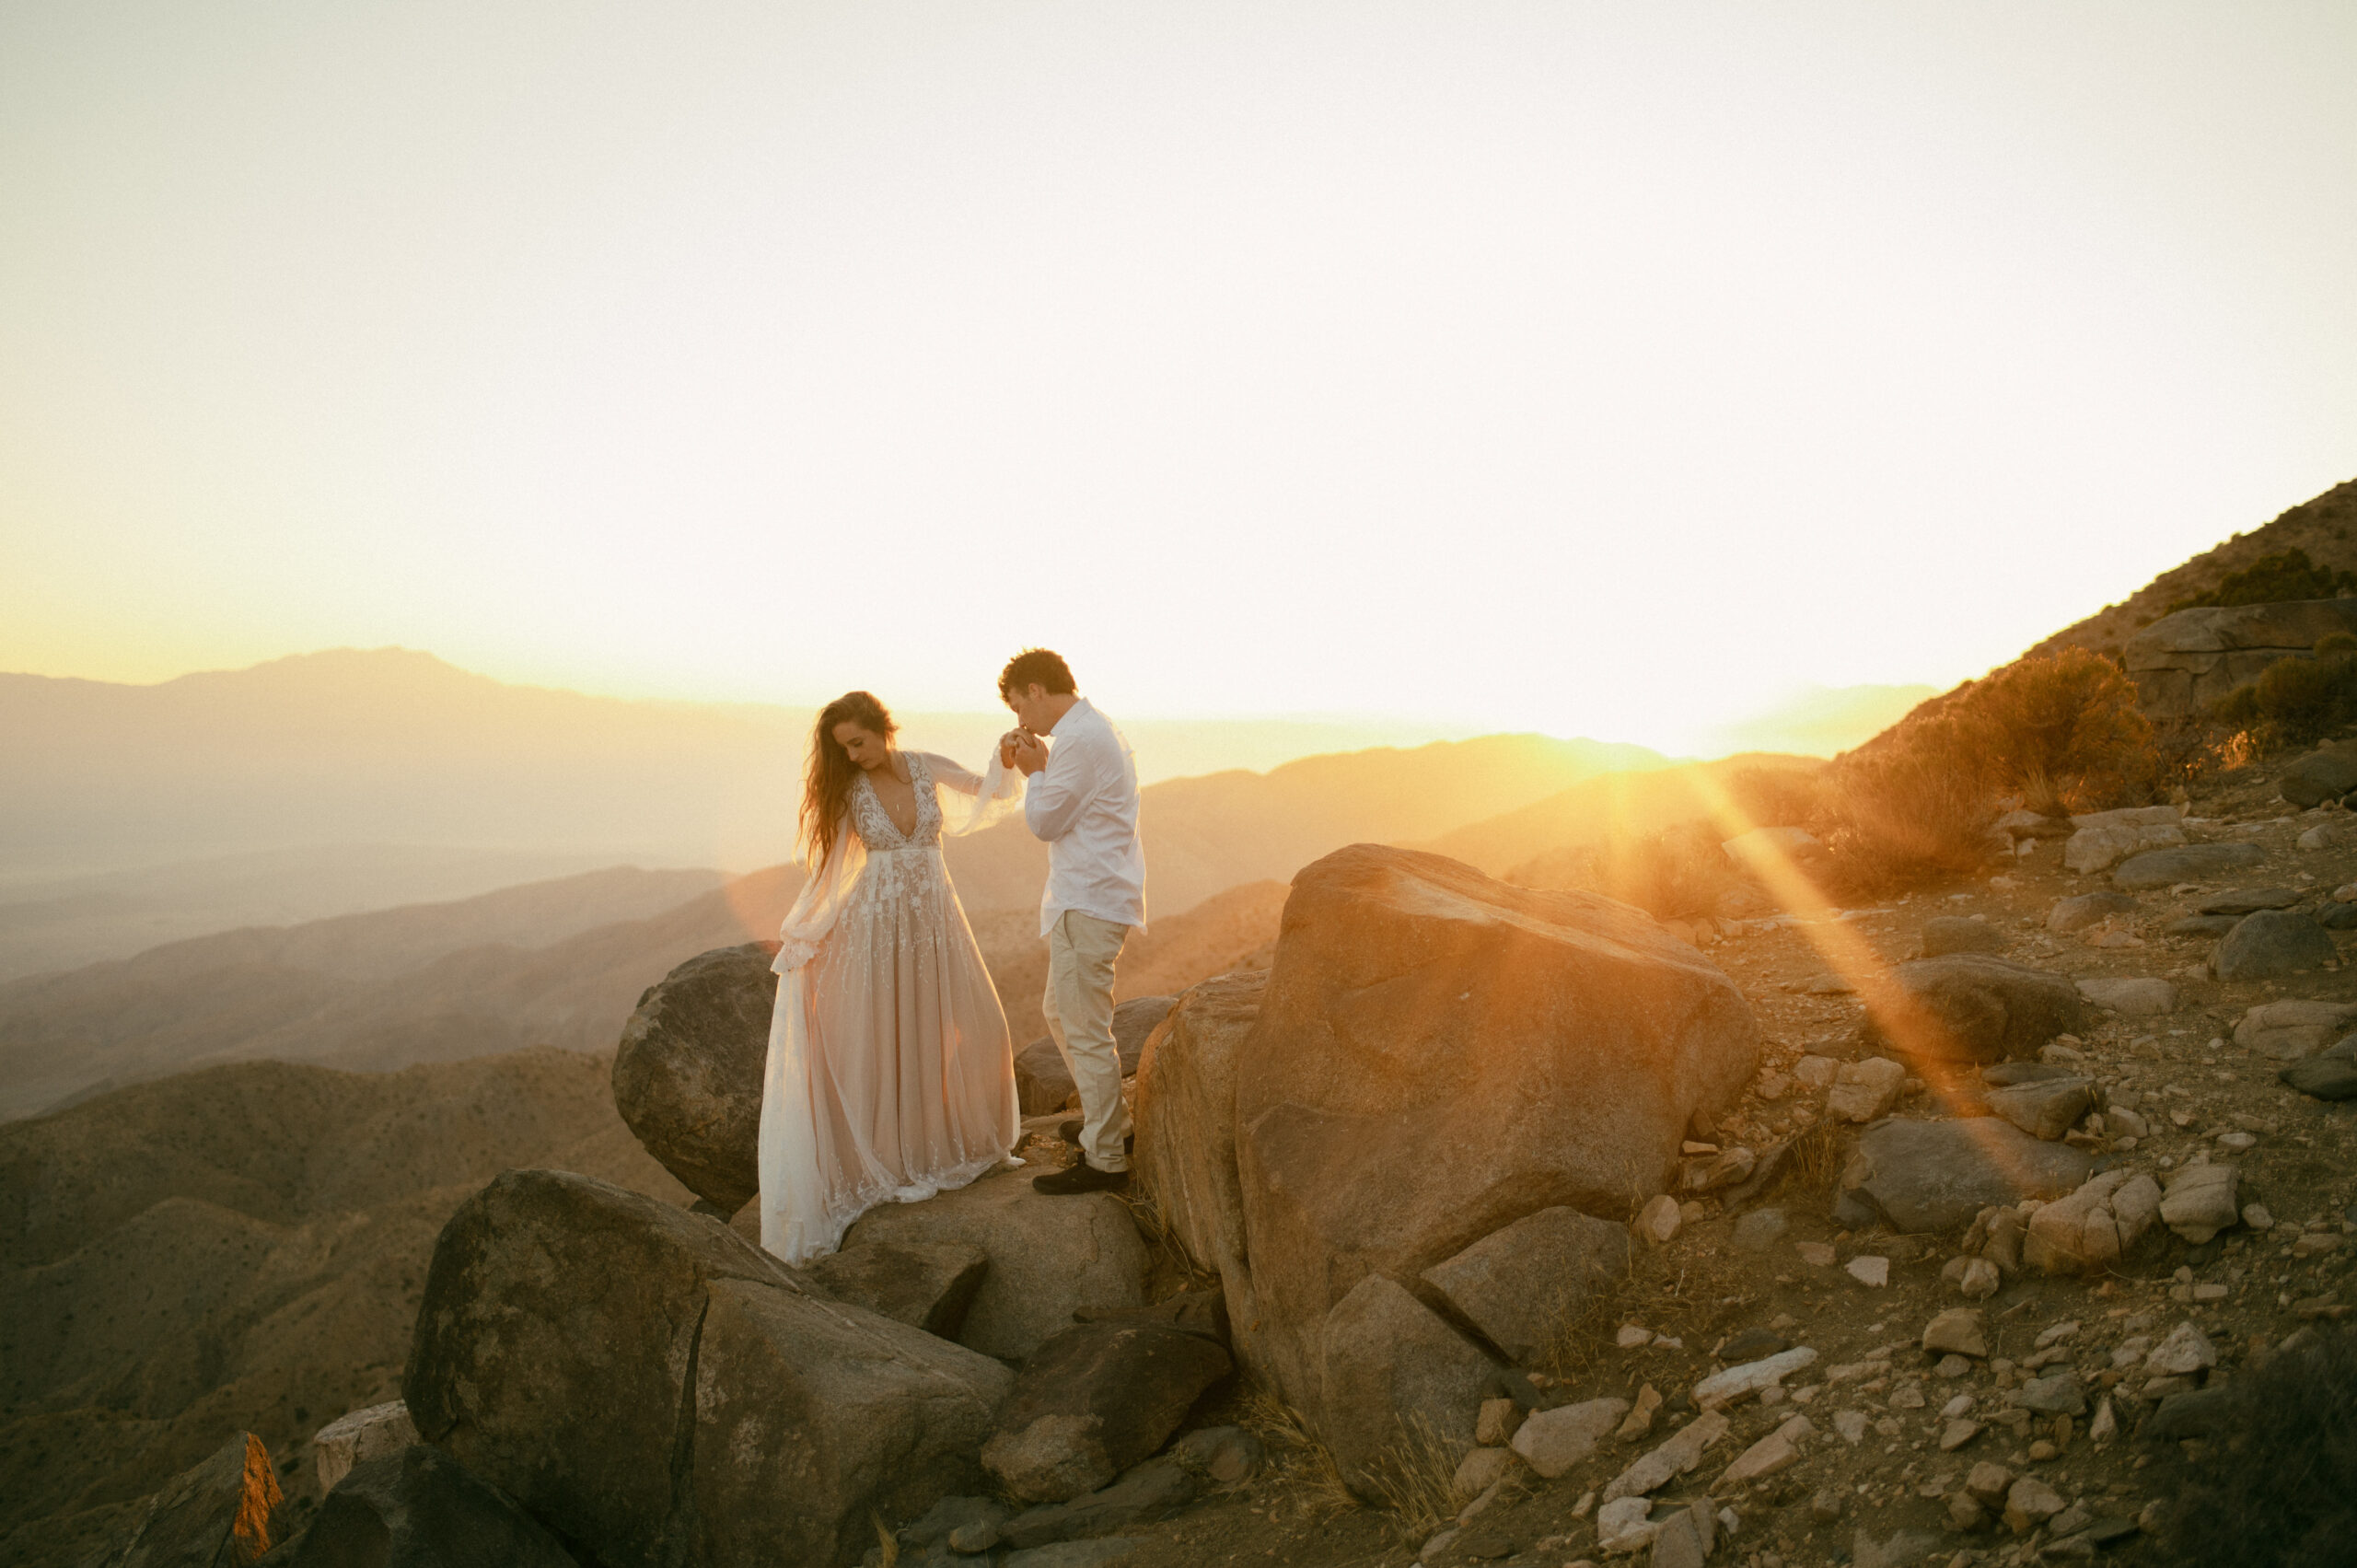 Key's View serves as a gorgeous destination elopement location in Joshua Tree National Park with it's stunning golden hour views and easily accessible mountain top.